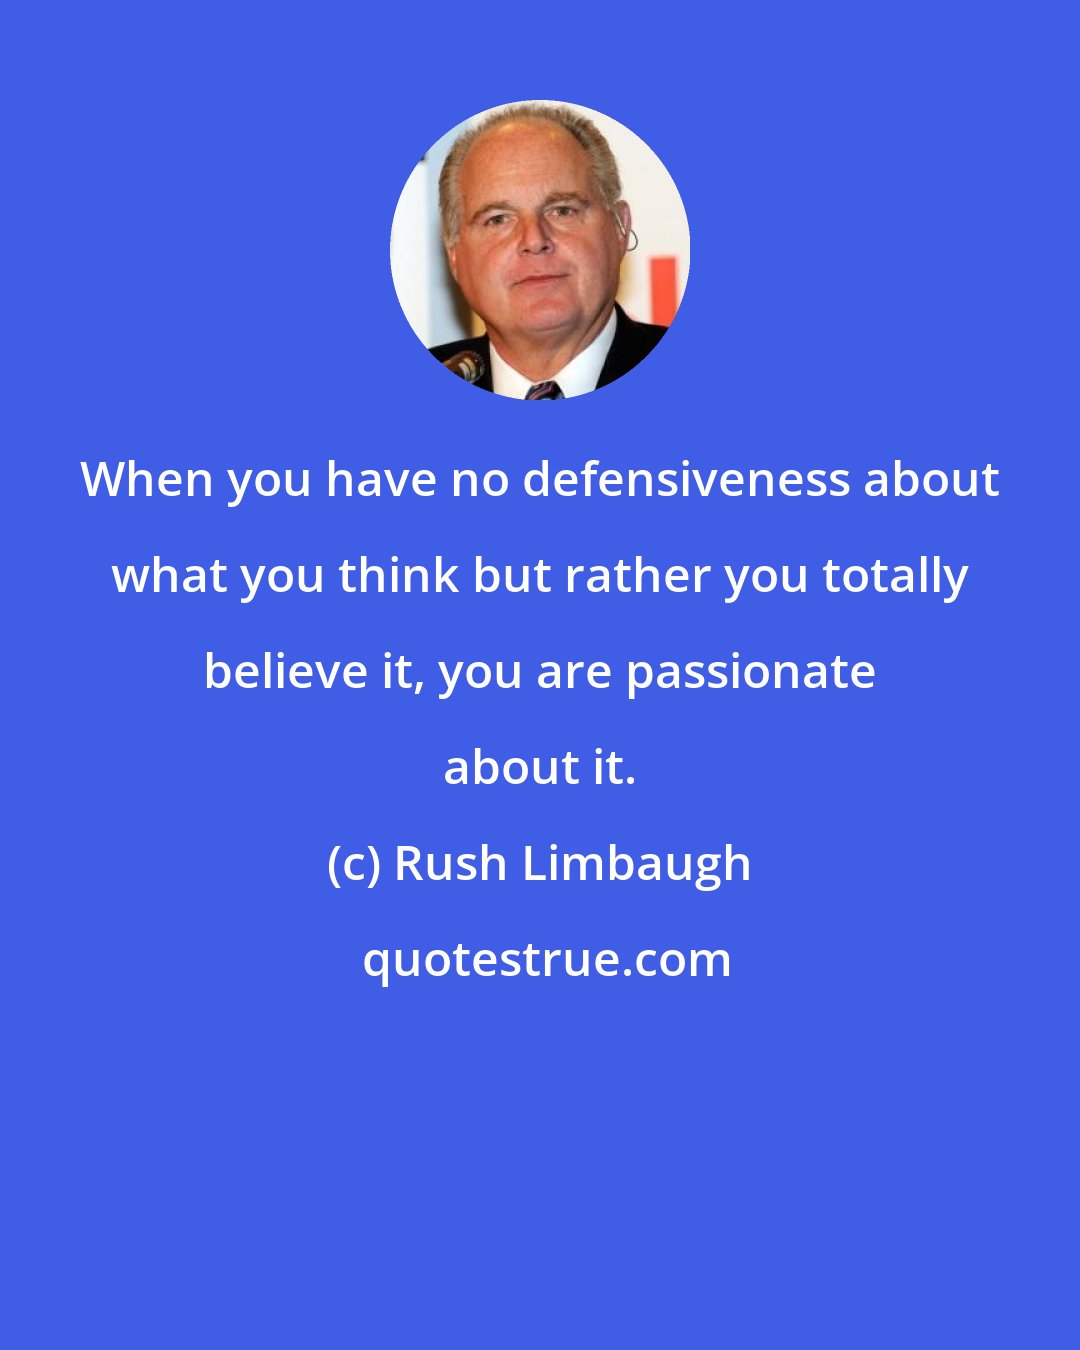 Rush Limbaugh: When you have no defensiveness about what you think but rather you totally believe it, you are passionate about it.